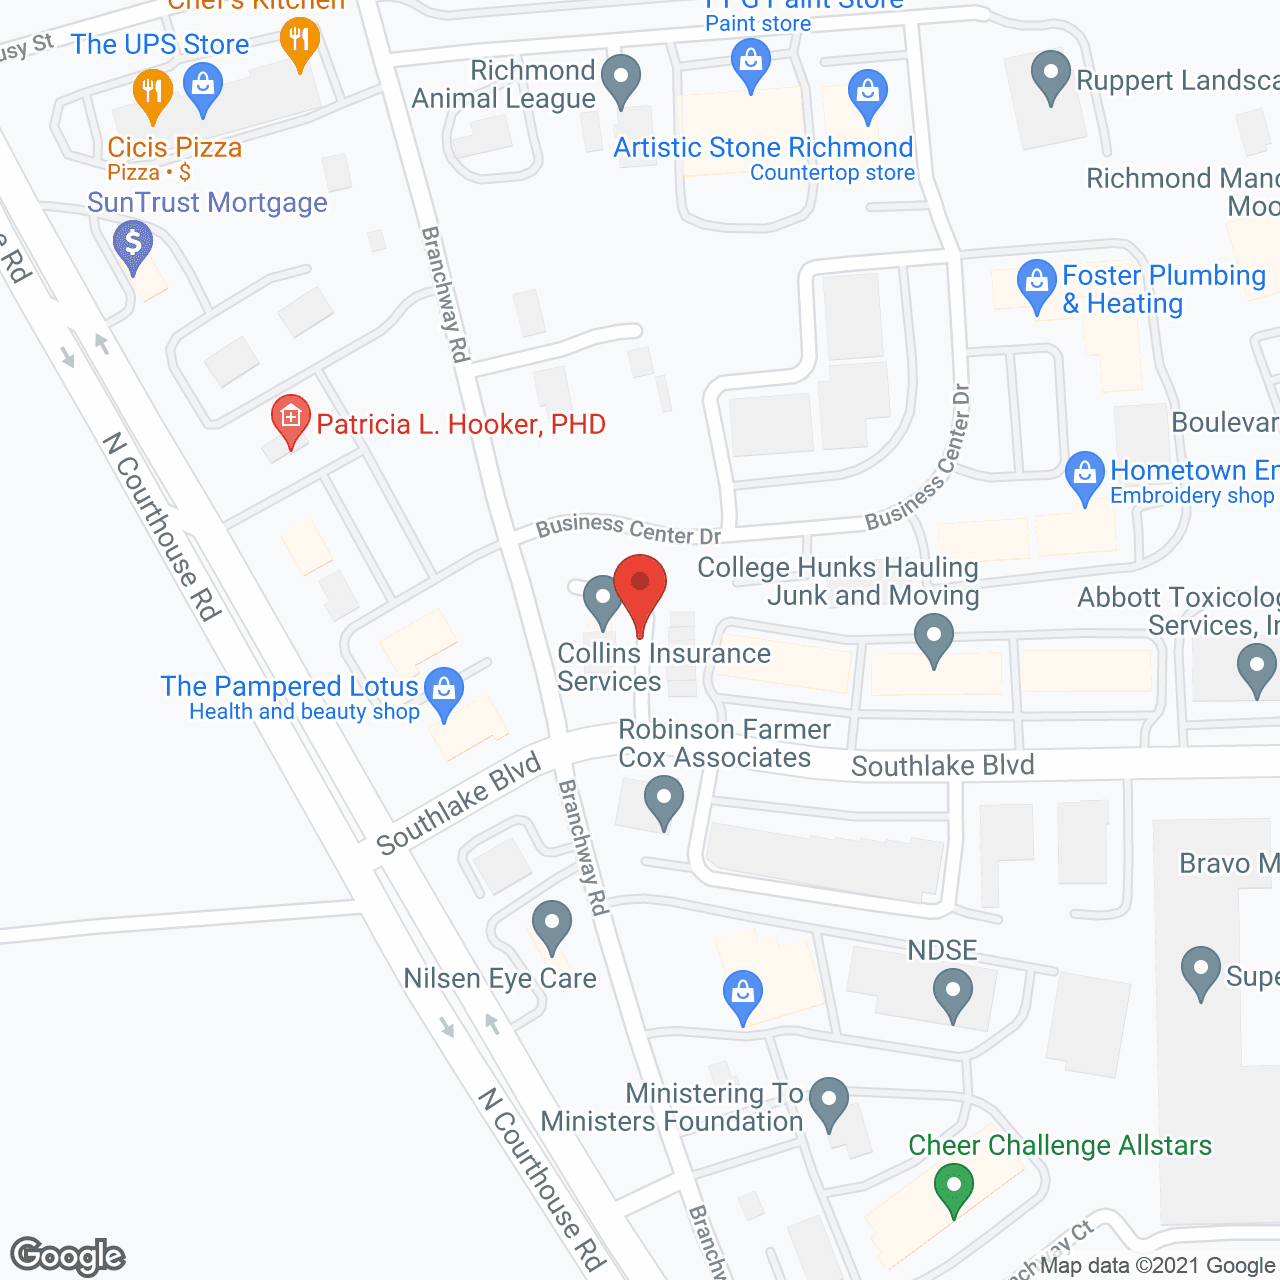 Visiting Angels Living Assistance Services in google map